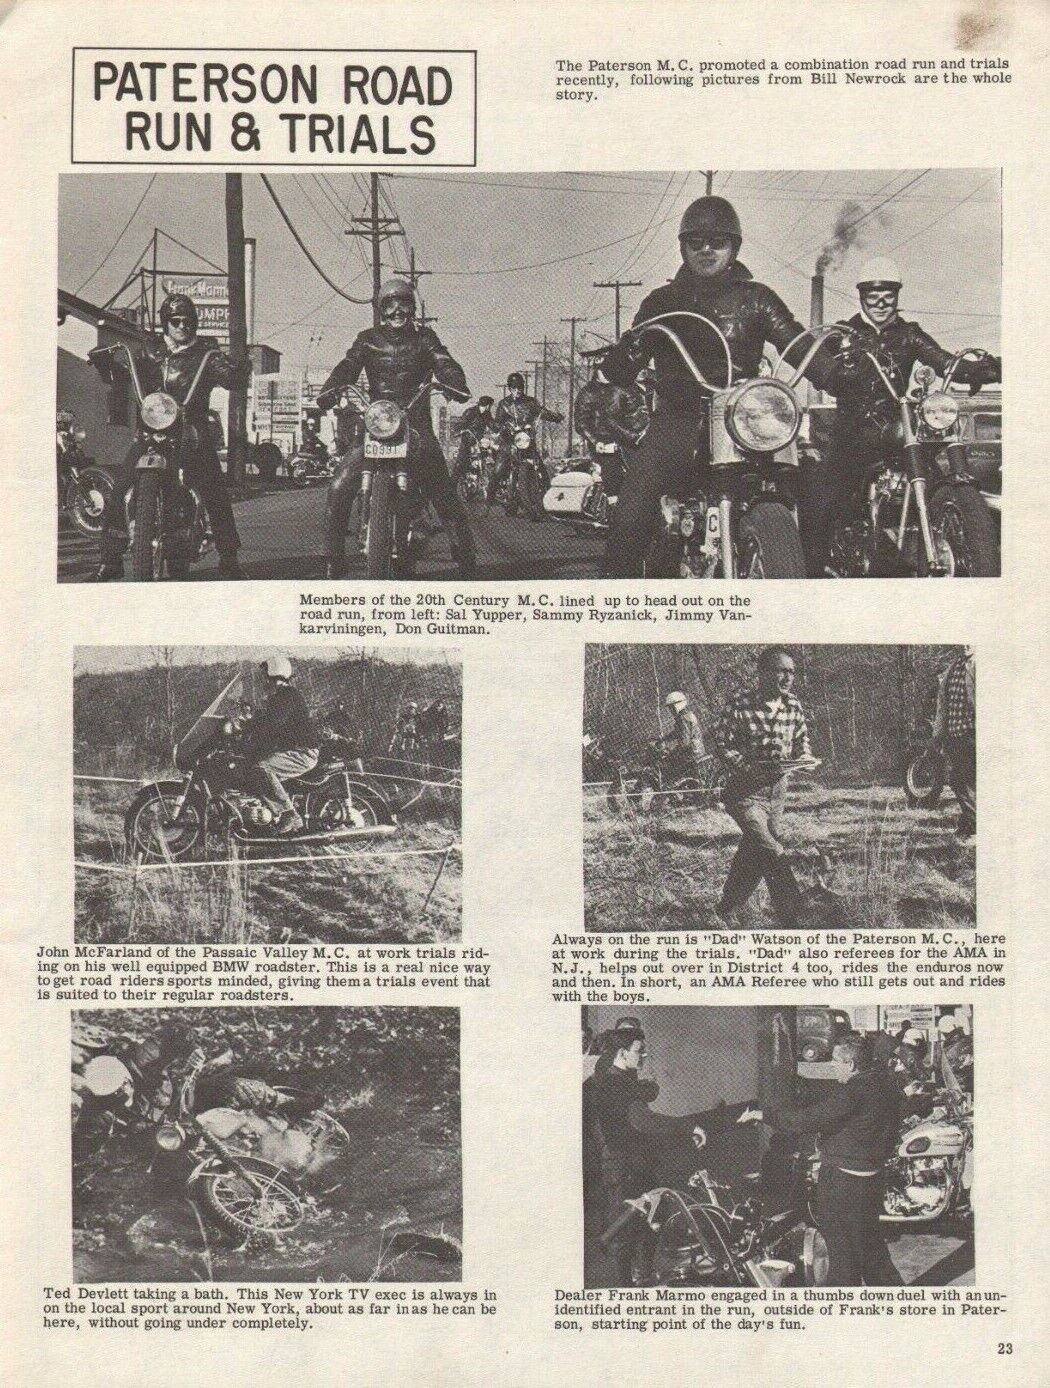 1961 Paterson New Jersey Motorcycle Club Run/Trials - Vintage Motorcycle Article